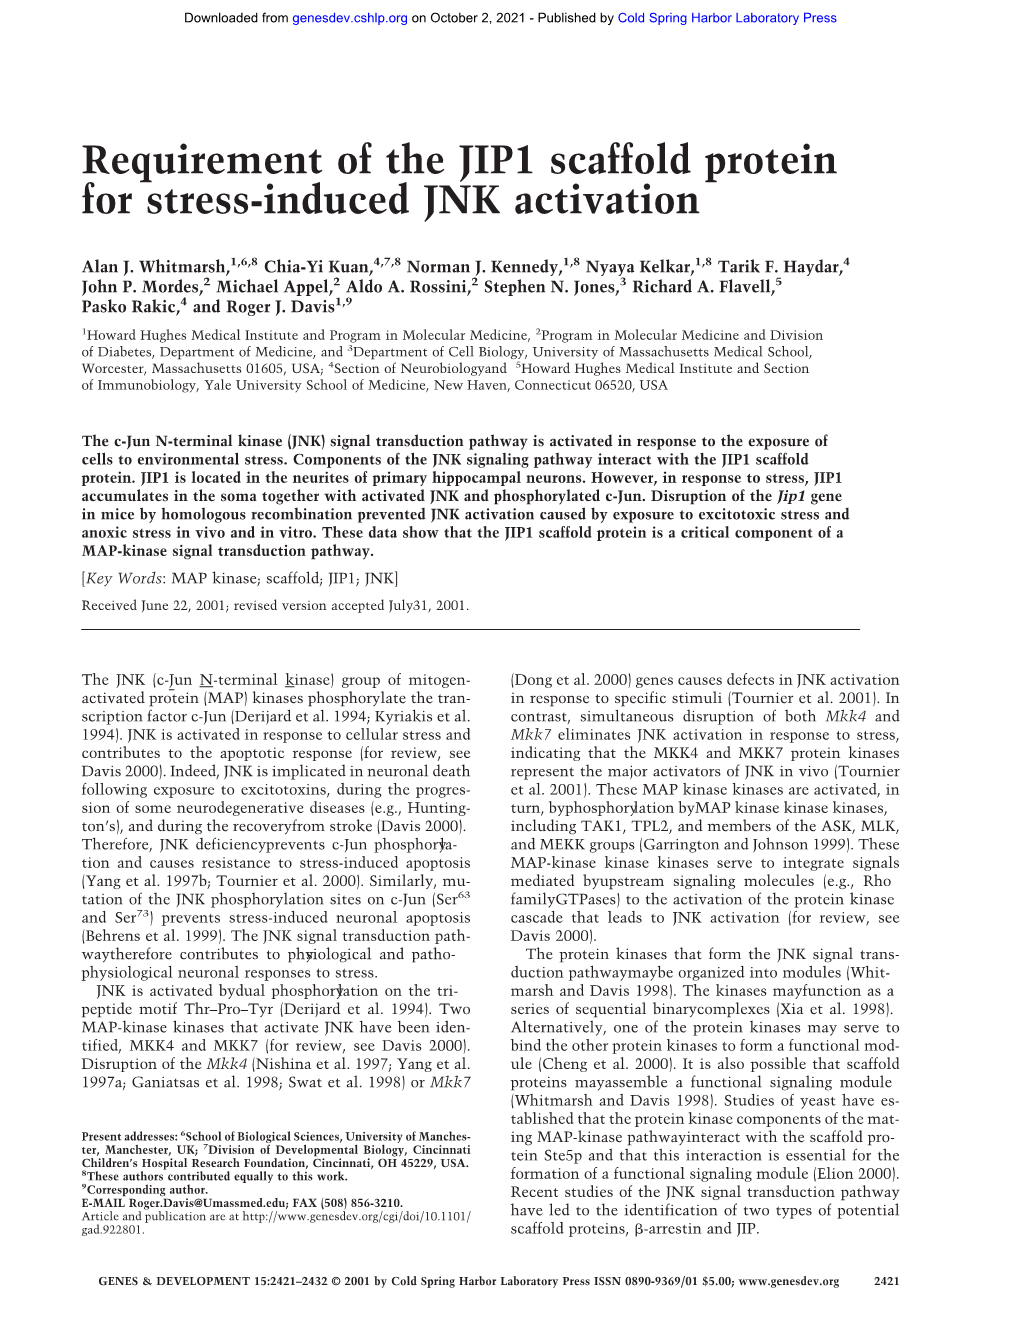 Requirement of the JIP1 Scaffold Protein for Stress-Induced JNK Activation